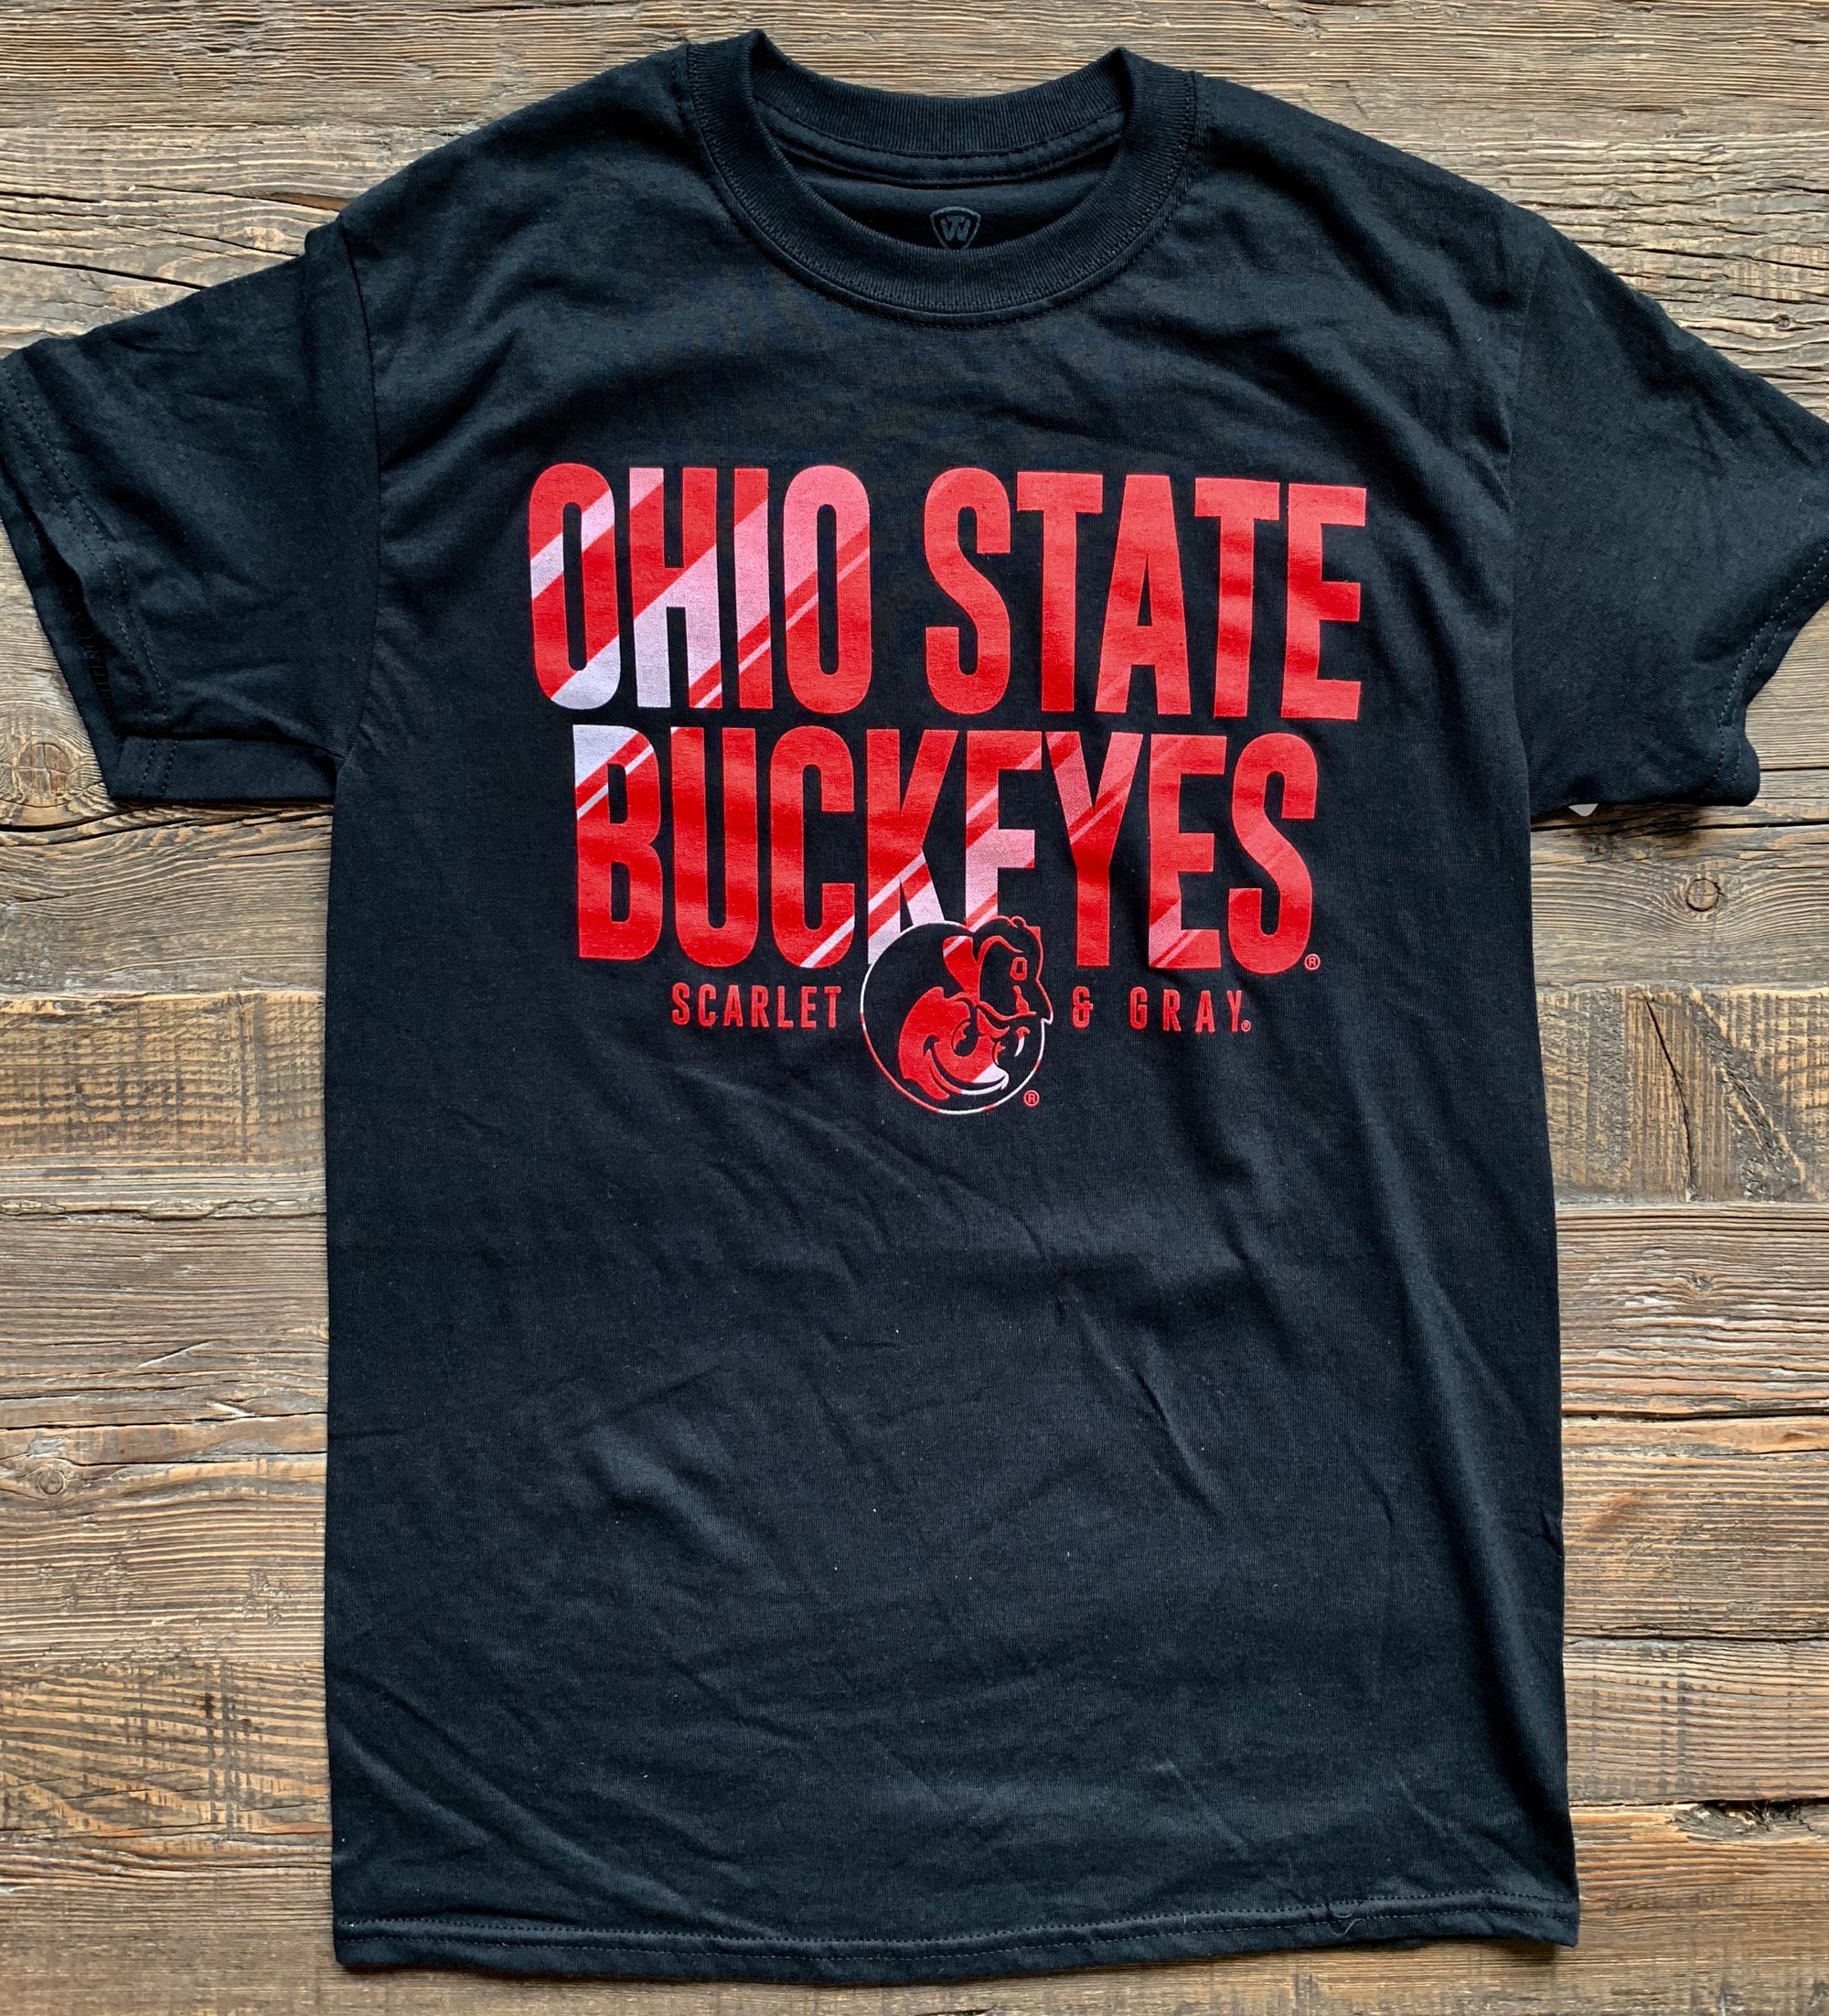 OSU sues ex-athlete over designs on T-shirts